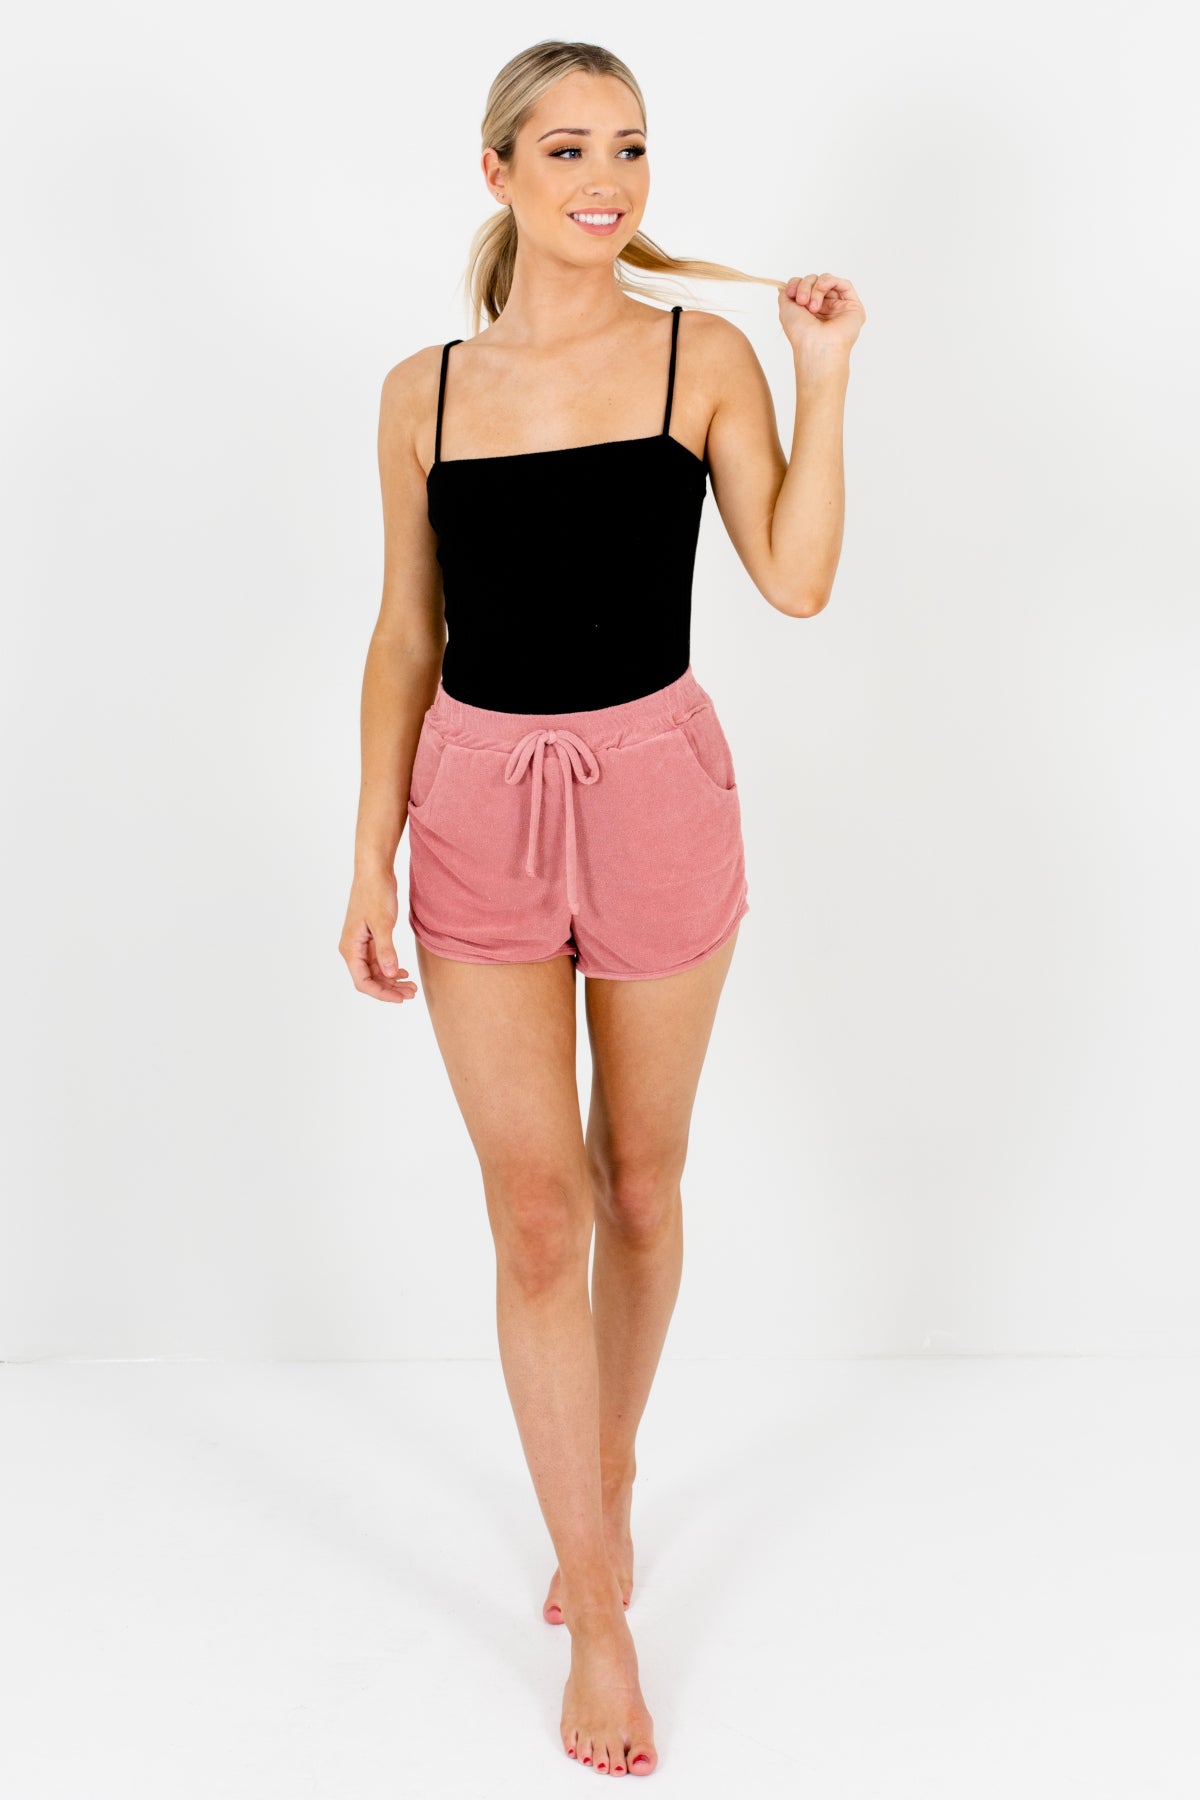 Girls Night In Pink Shorts | Affordable 